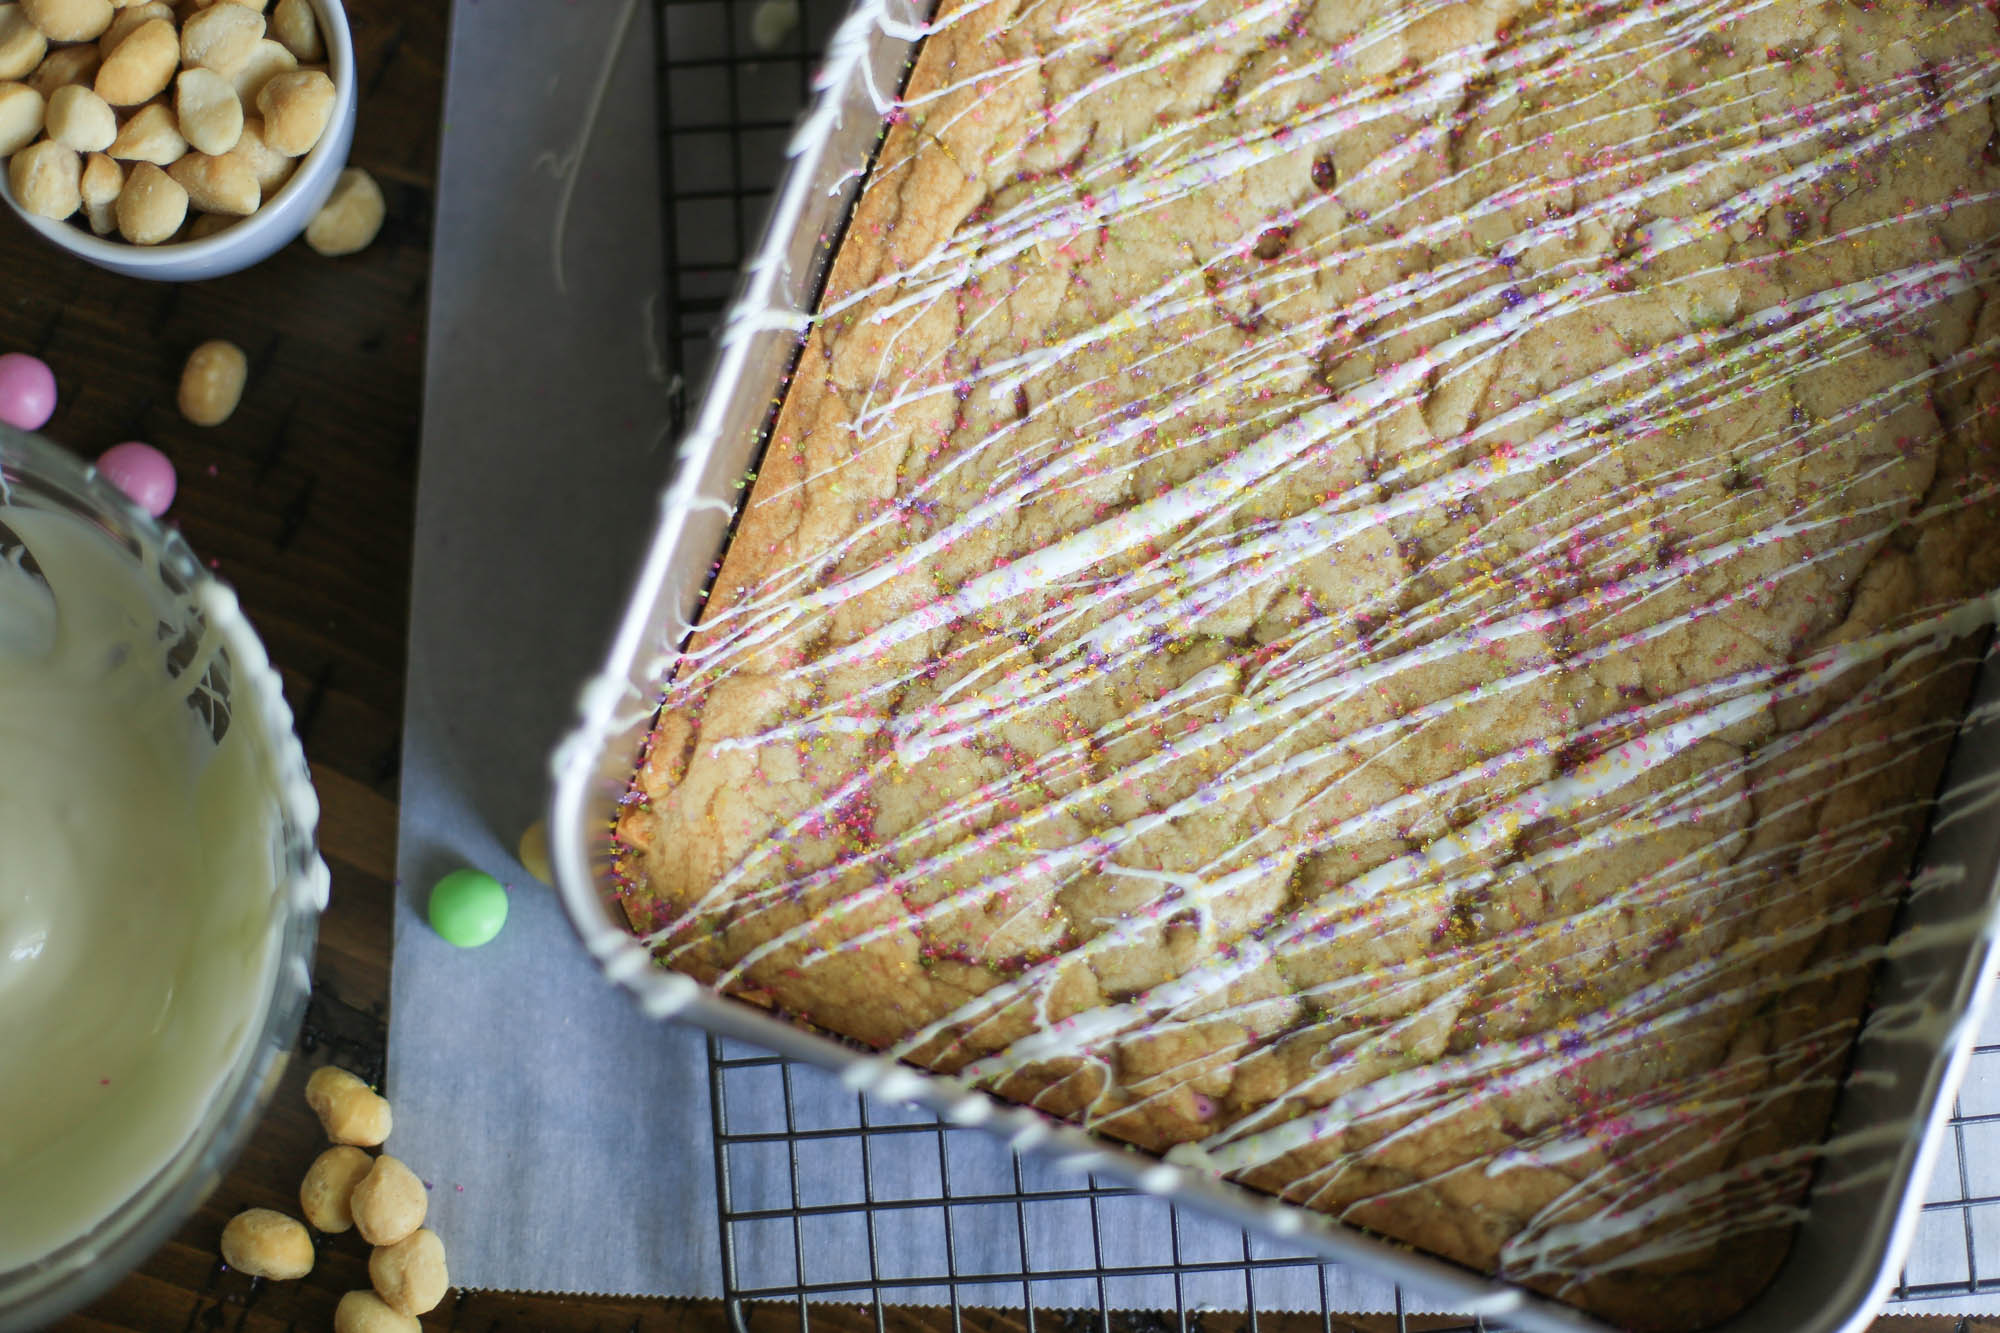 White Chocolate Macadamia Nut Bars by The District Table